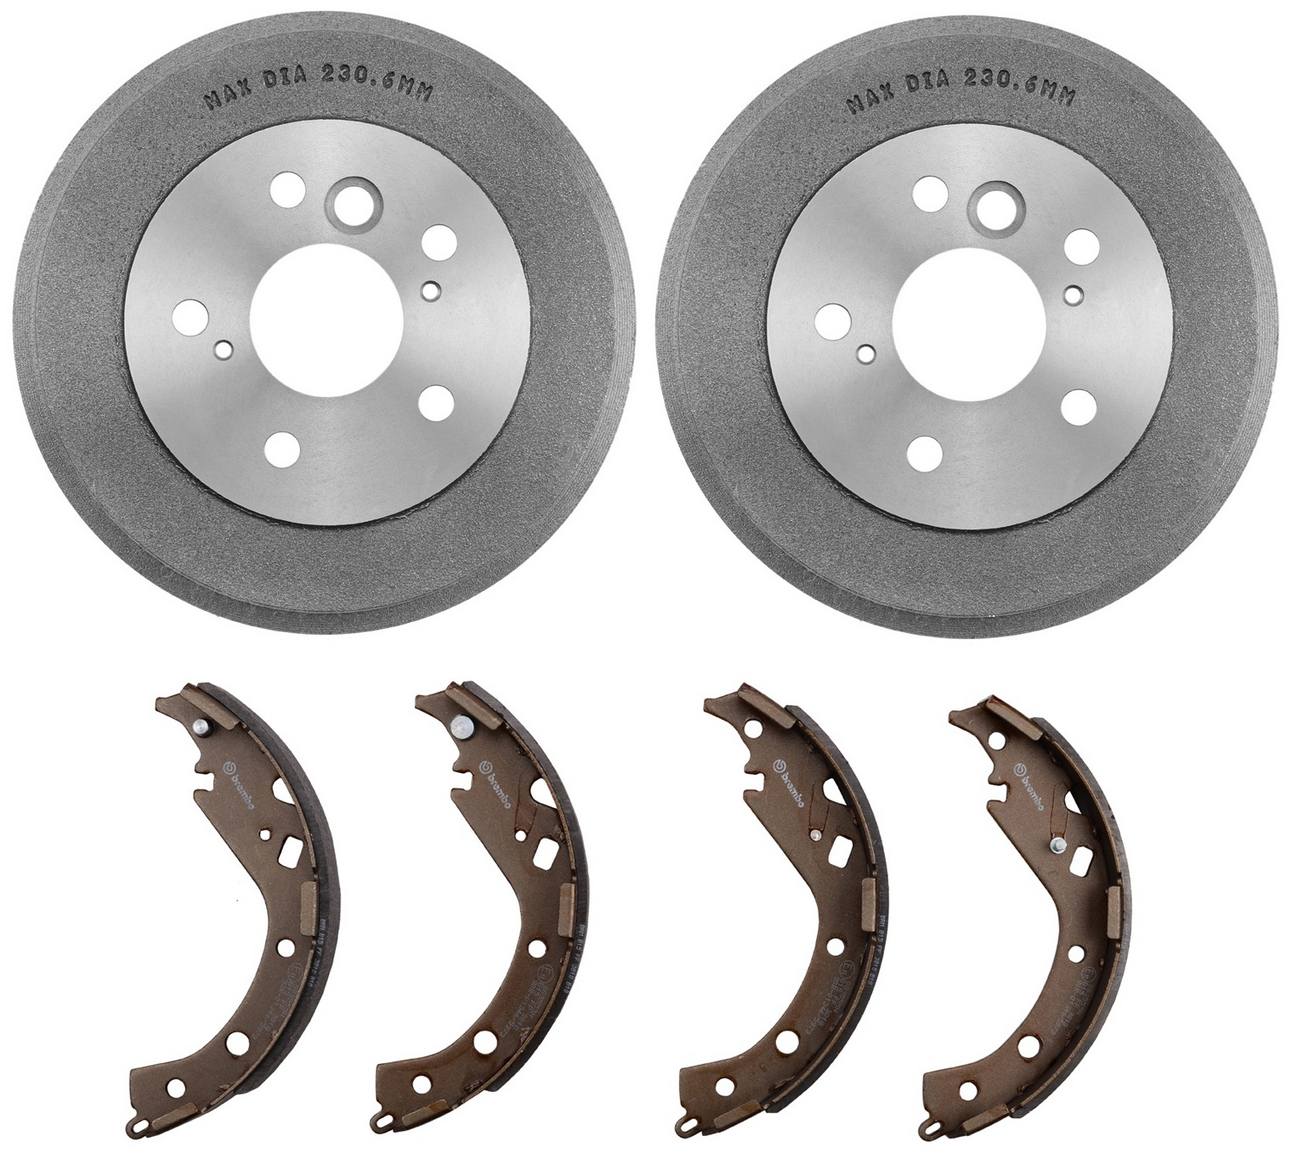 Toyota Drum Brake Shoe and Drum Kit - Rear (228mm) Brembo